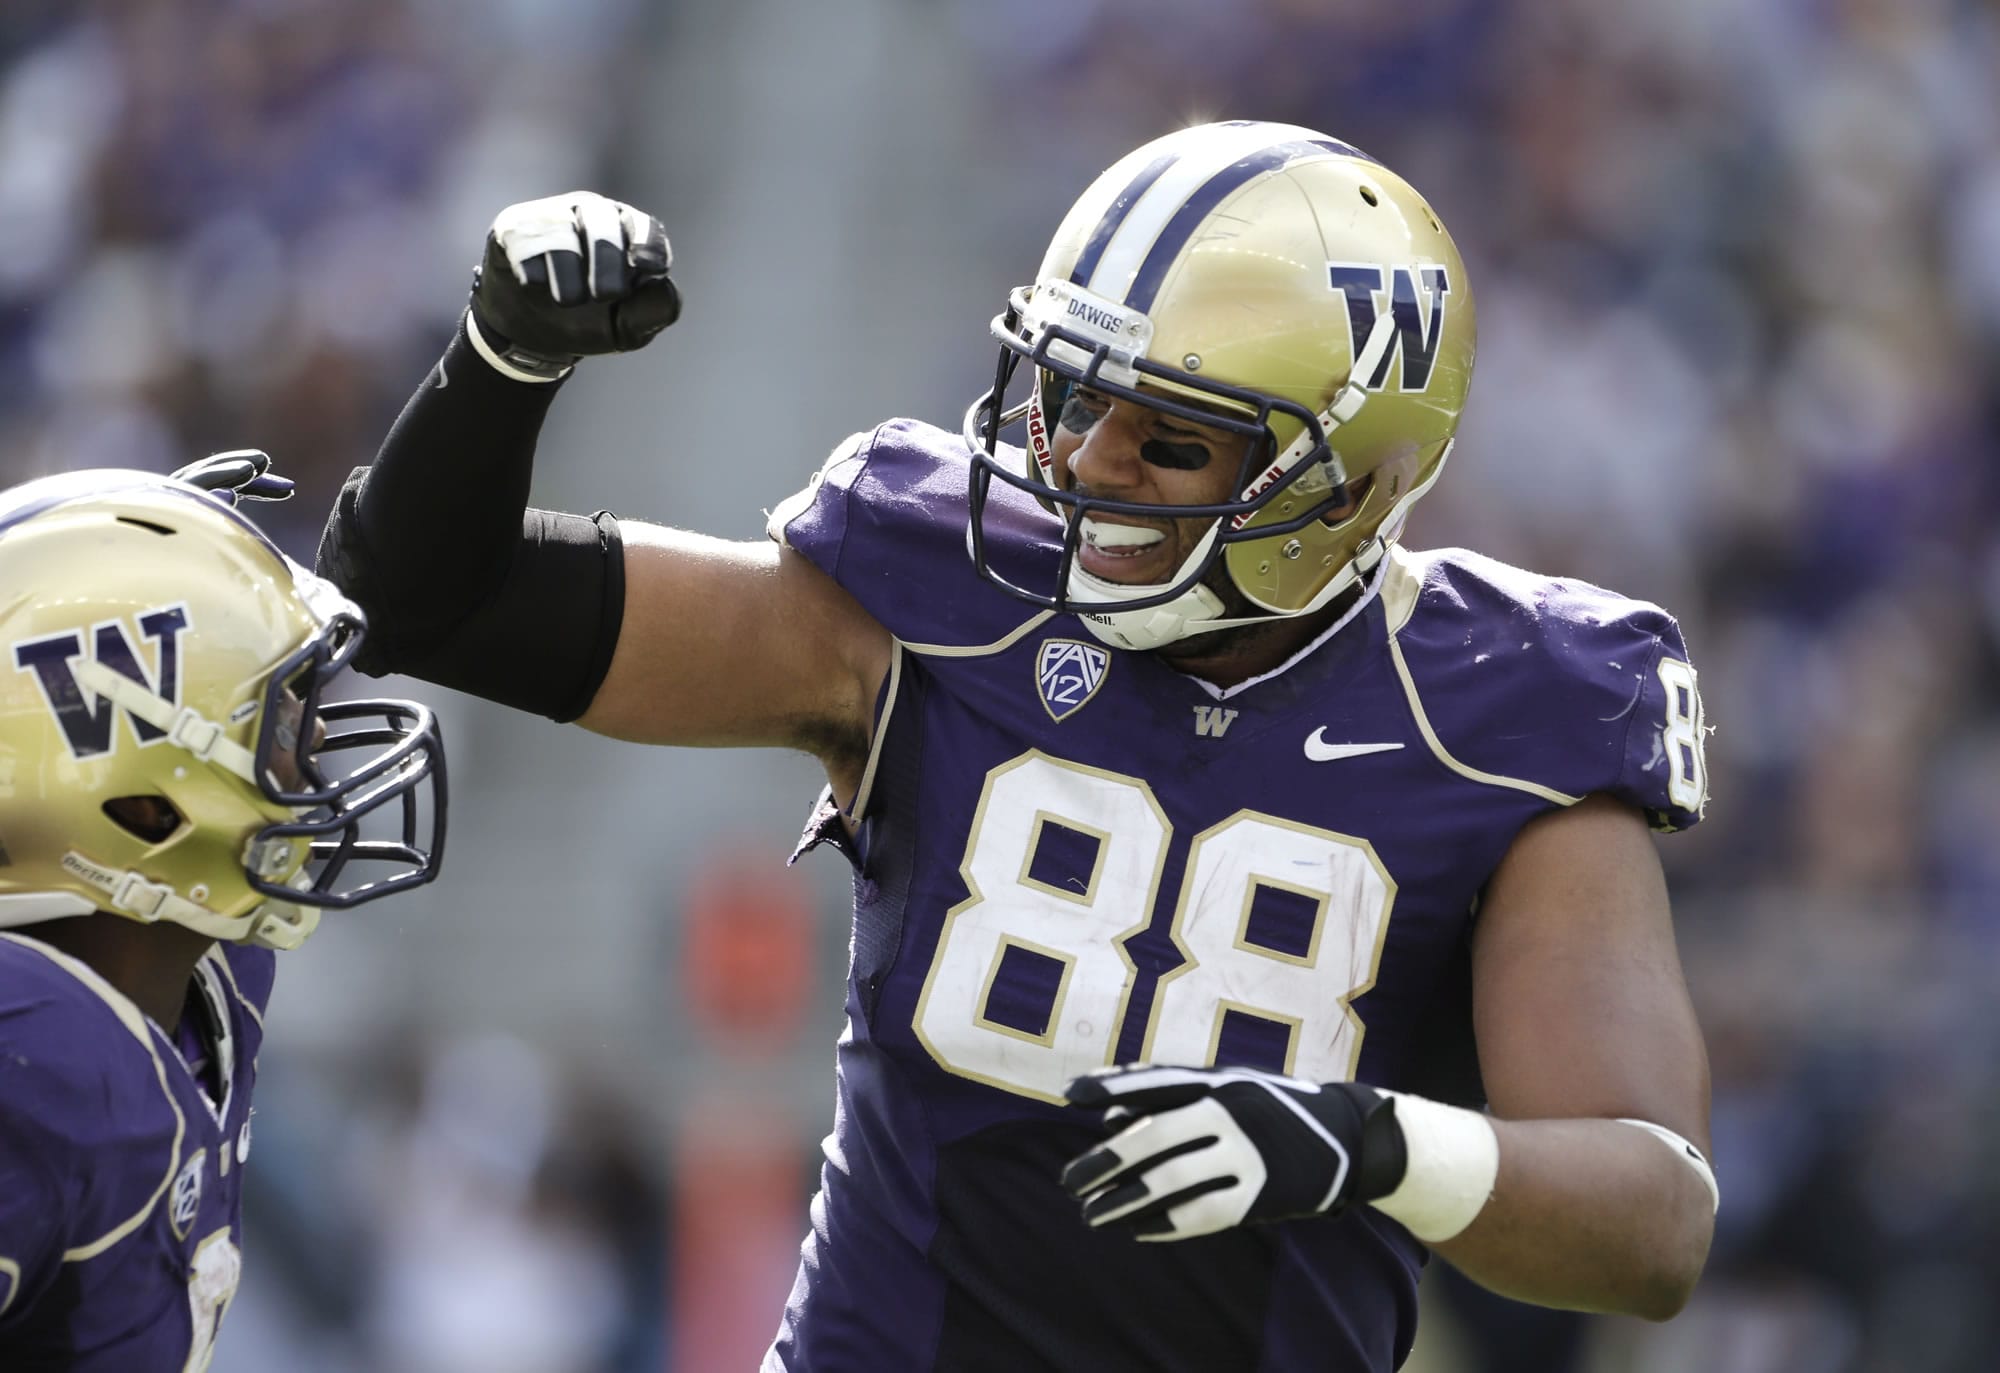 Washington's Austin Seferian-Jenkins (88) celebrates his touchdown against Idaho State with Kevin Smith in the first half of an NCAA college football game Saturday, Sept. 21, 2013, in Seattle.